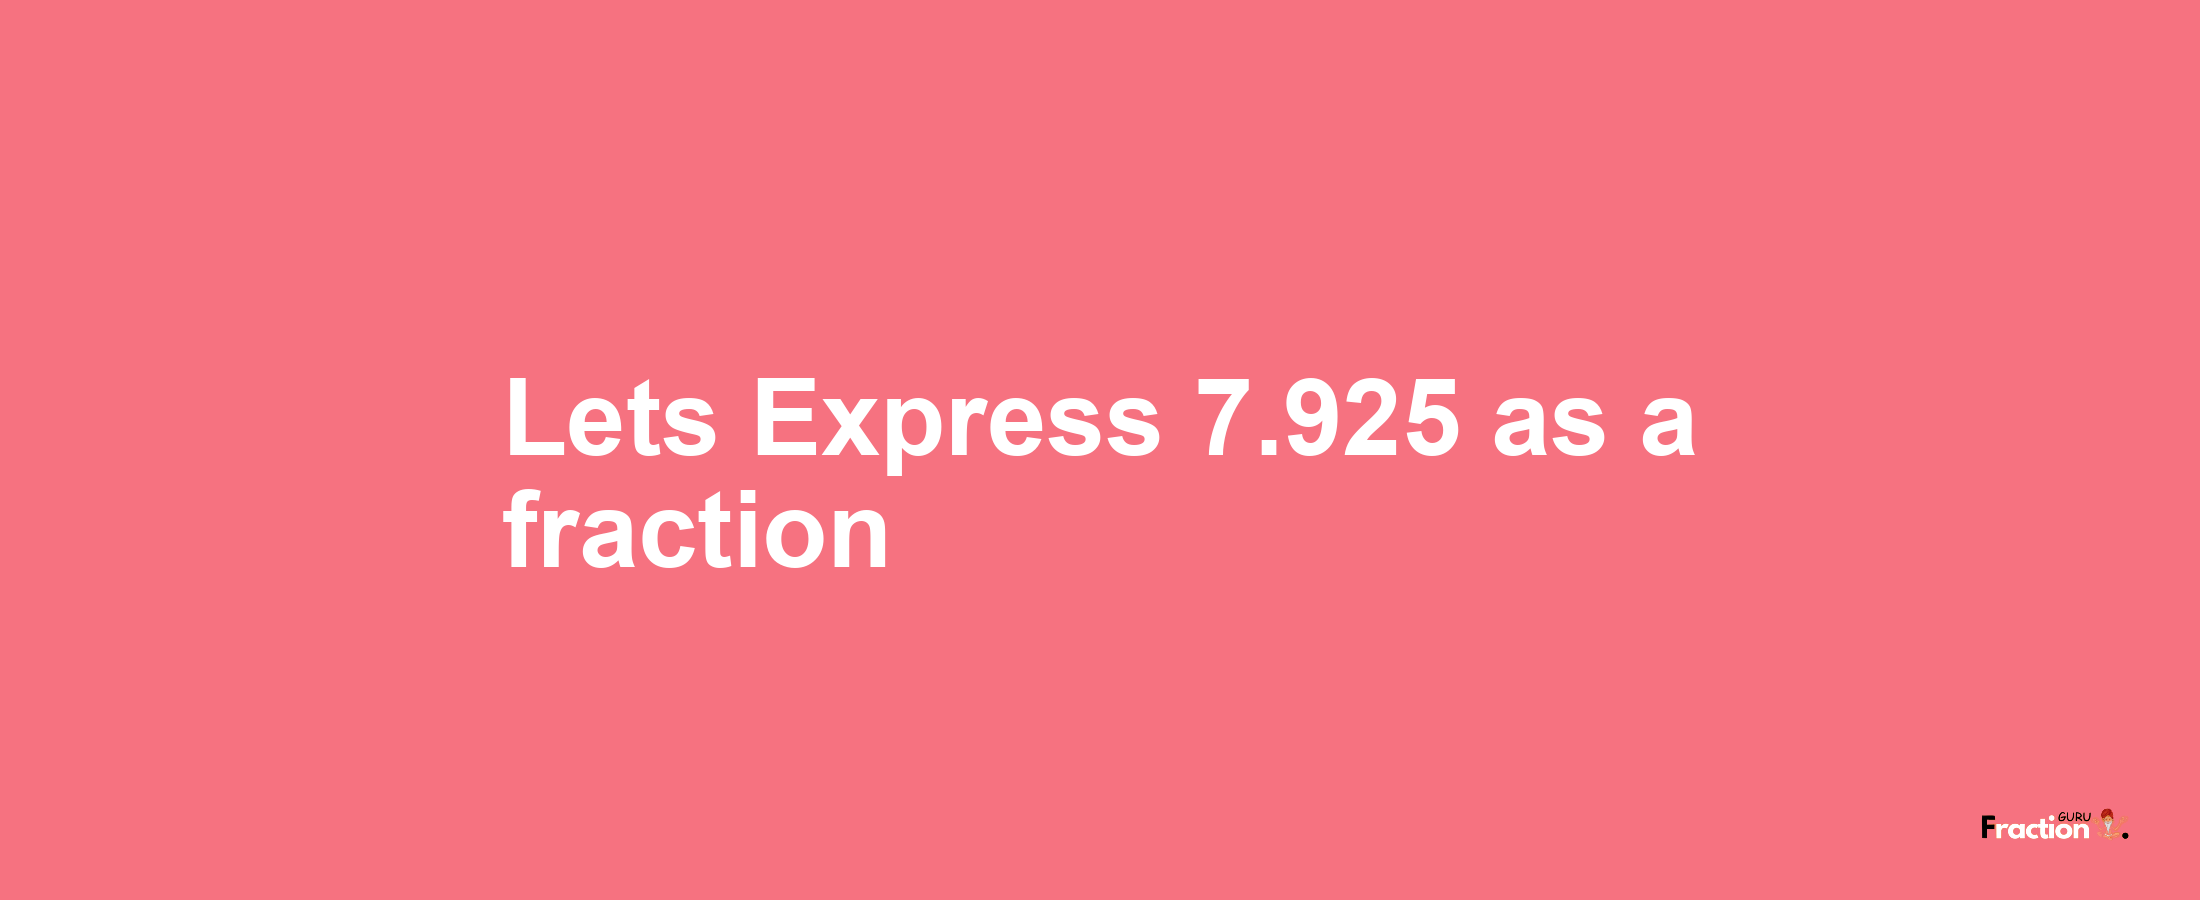 Lets Express 7.925 as afraction